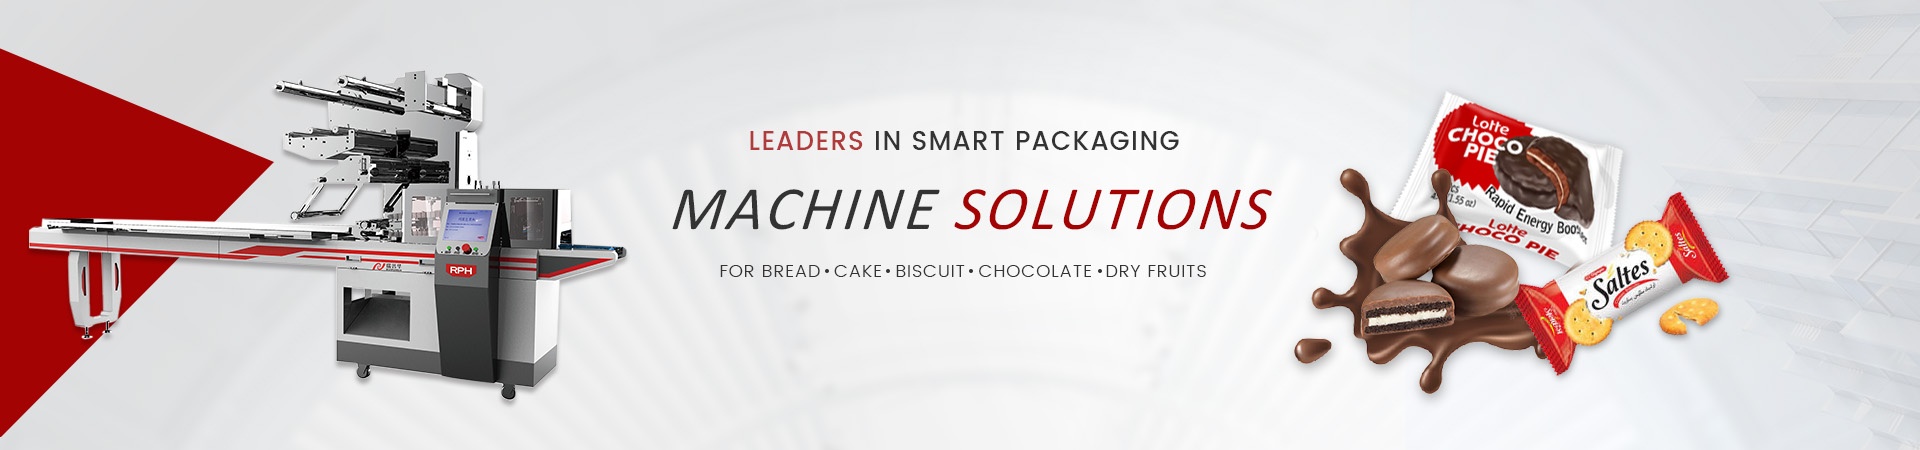 On Edge Bakery Biscuit Packaging System